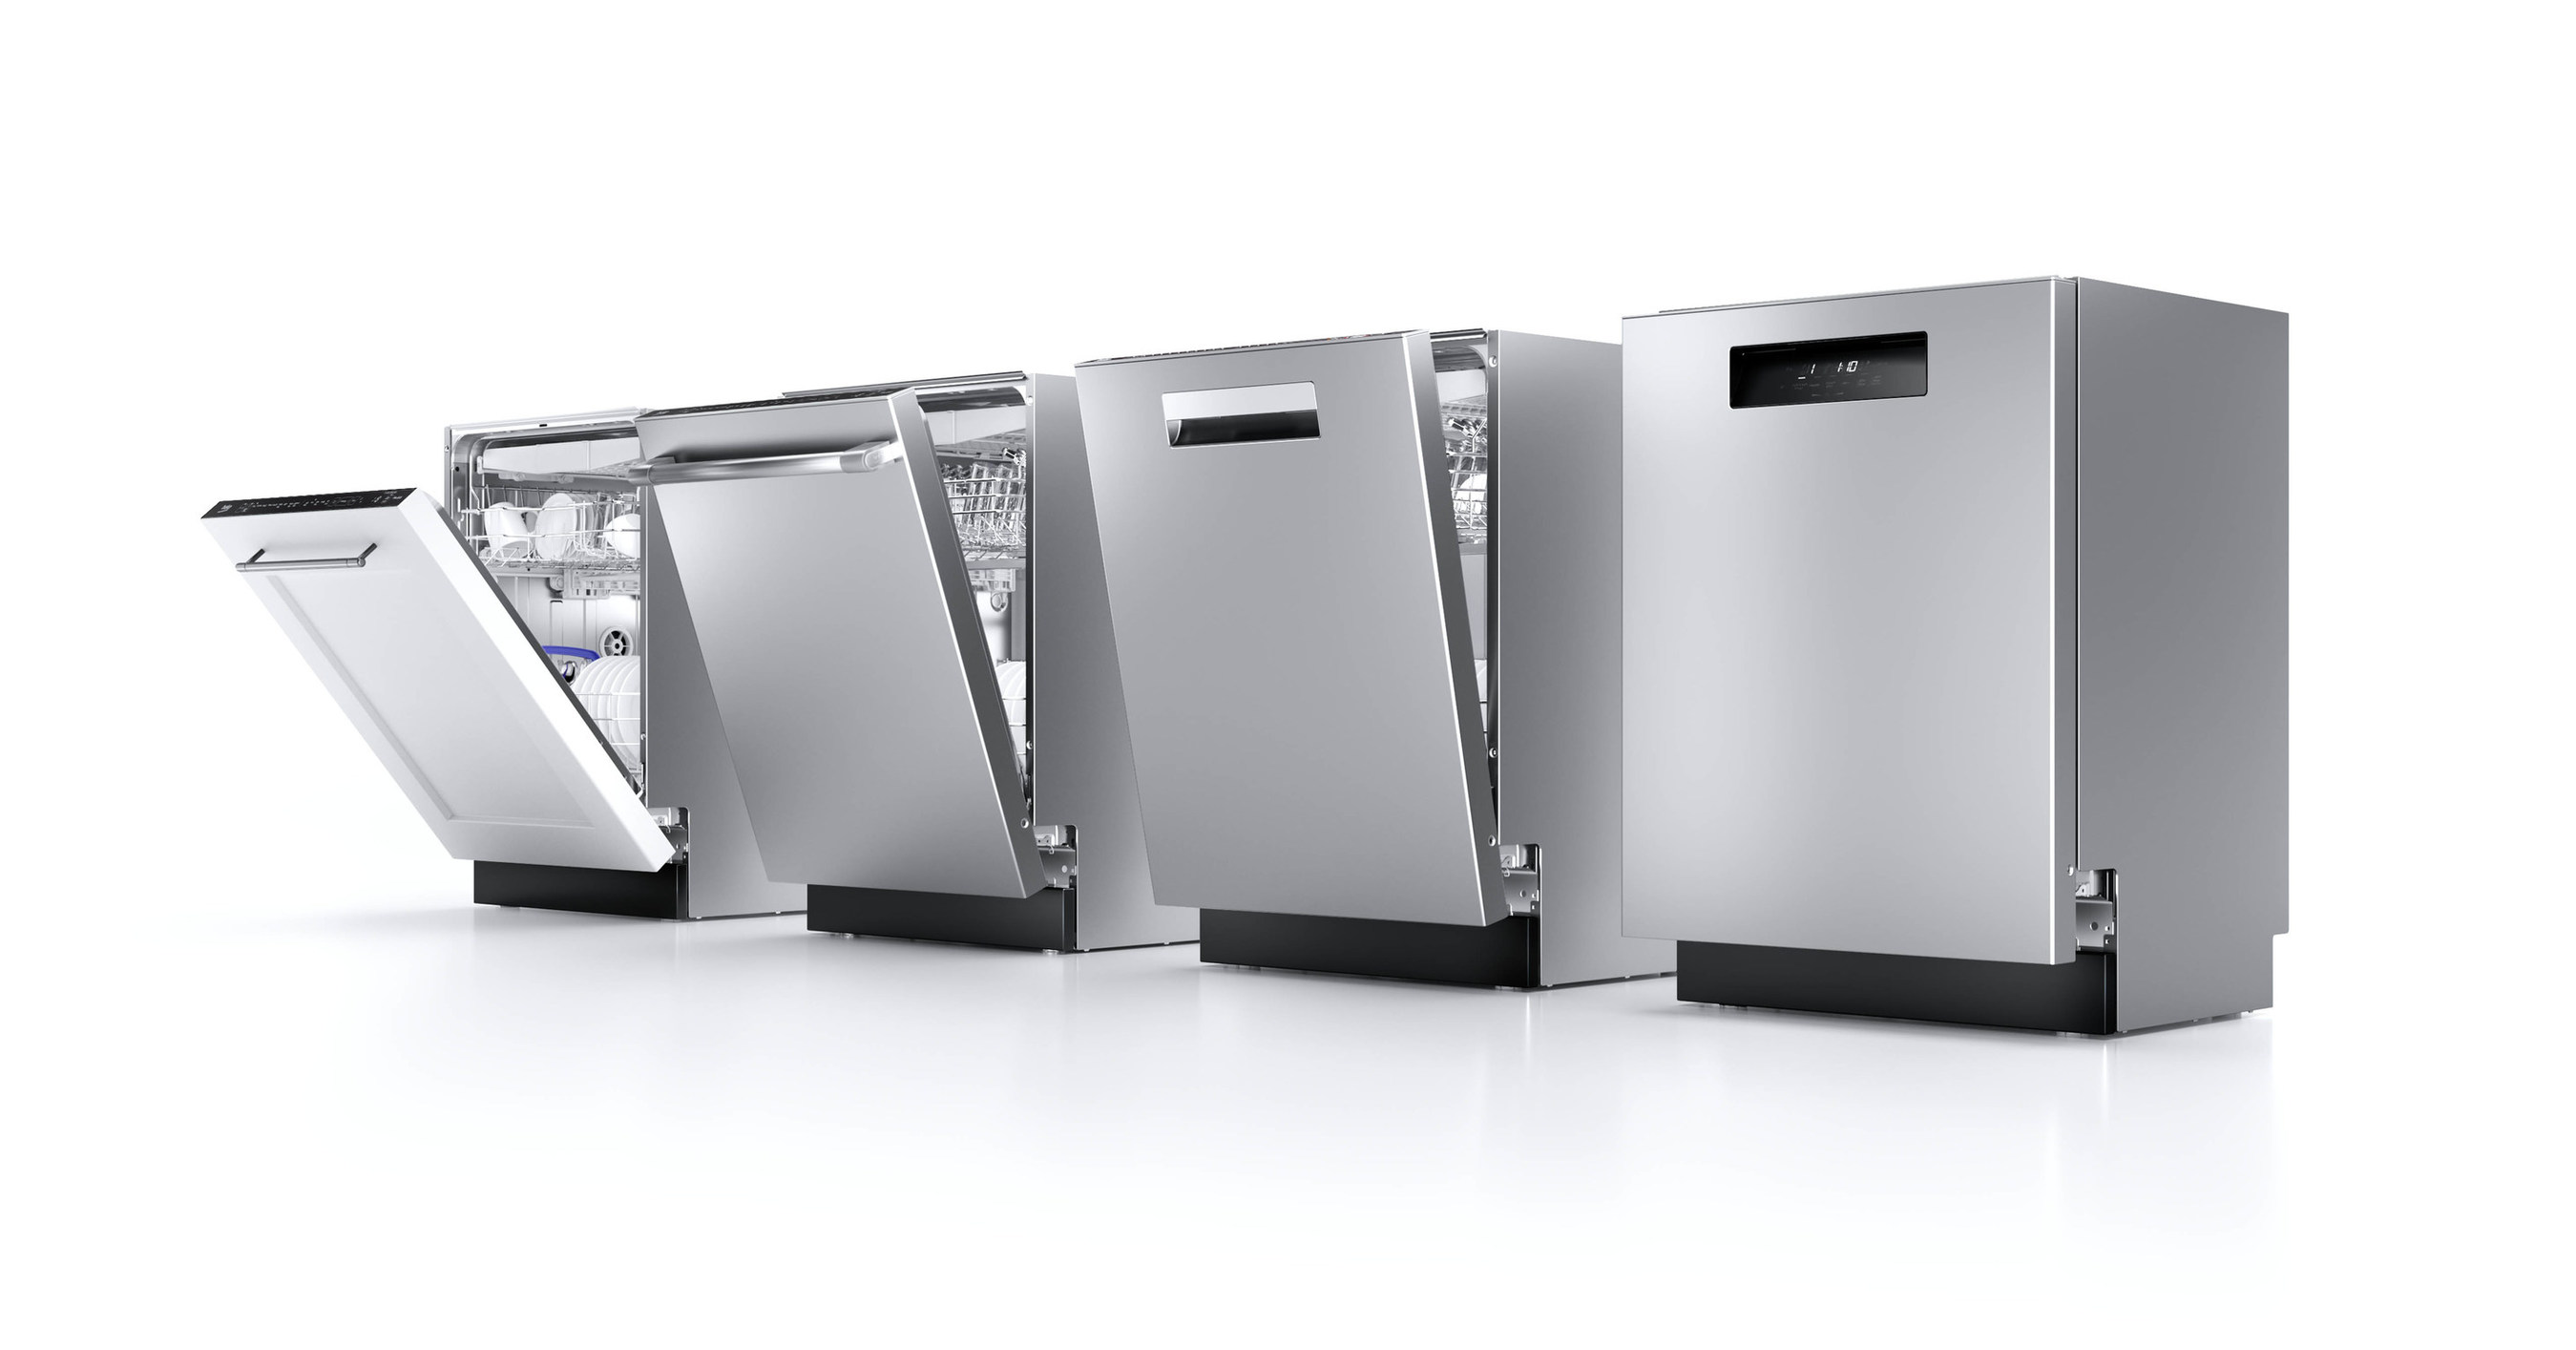 BEKO LAUNCHES THE WORLD\'S FIRST DISHWASHERS THAT CLEAN THE ENTIRE WASHTUB  USING LESS WATER AND ENERGY